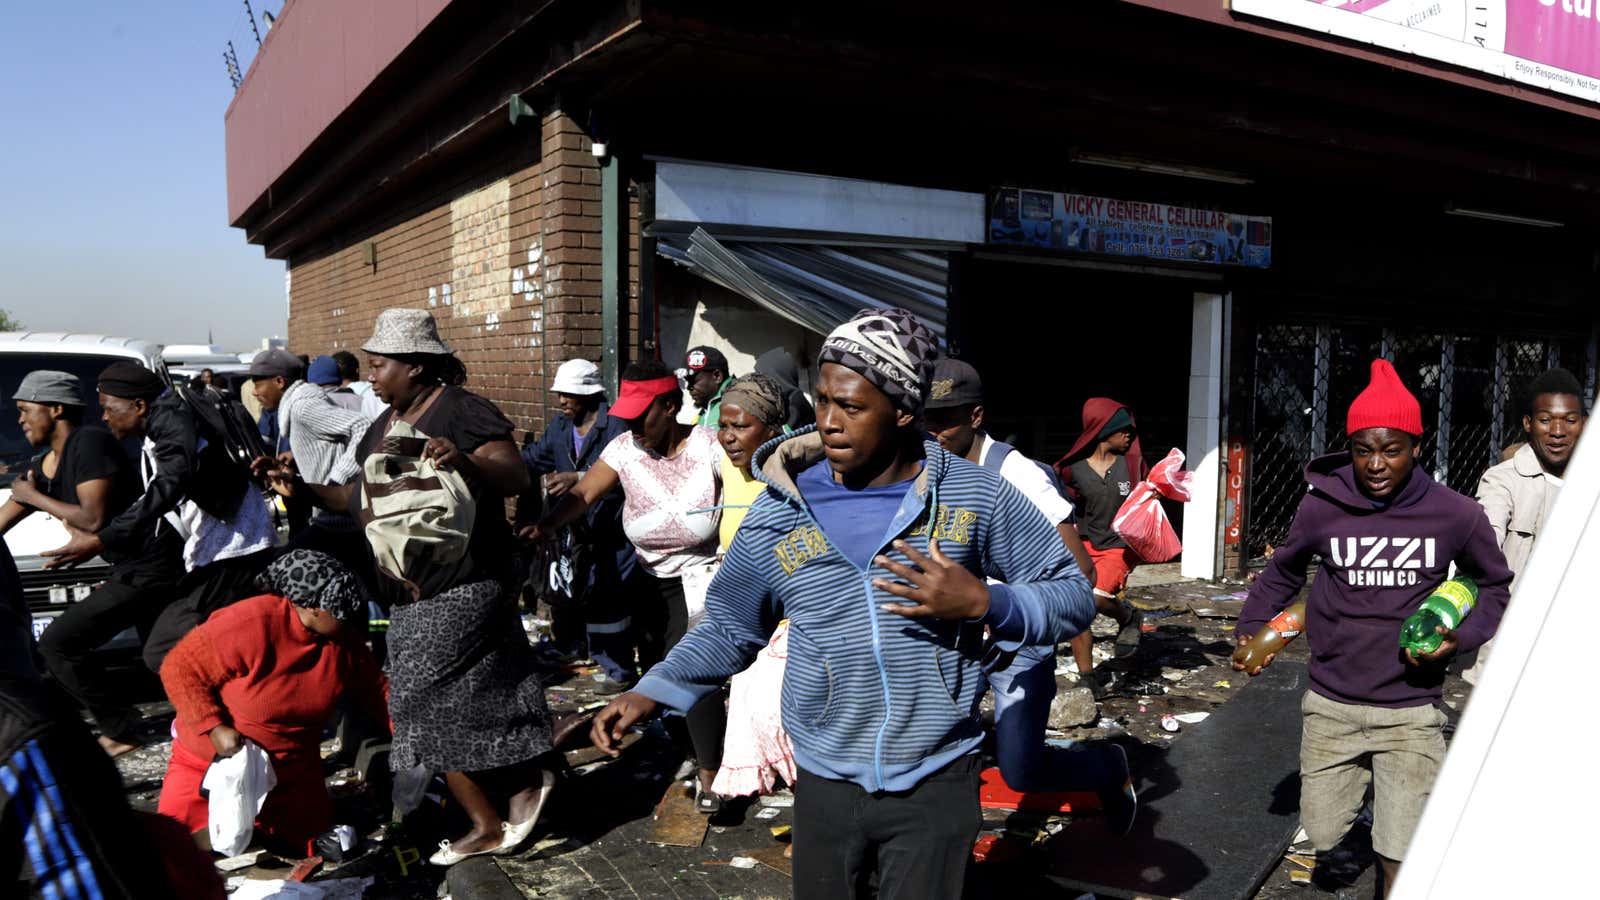 Looters make off with goods from a store in Germiston, east of Johannesburg, South Africa as part of the xenophobic violence against African store owners